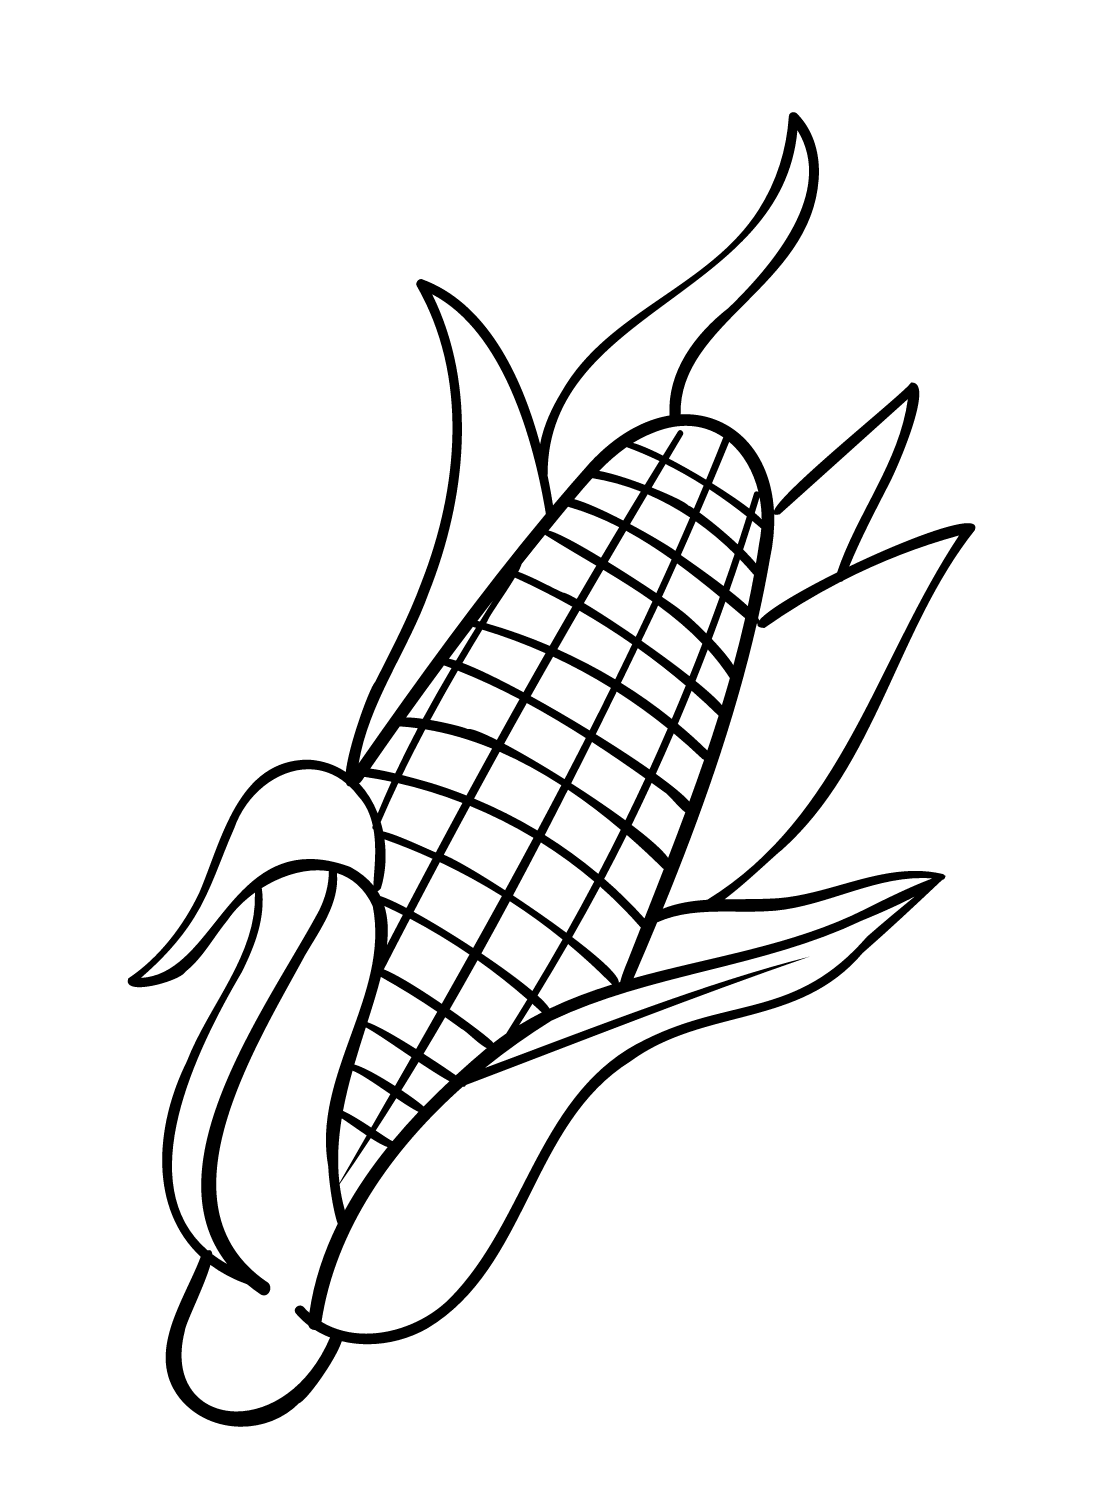 Sweet Corn Coloring Pages - Corn Coloring Pages - Coloring Pages For Kids  And Adults